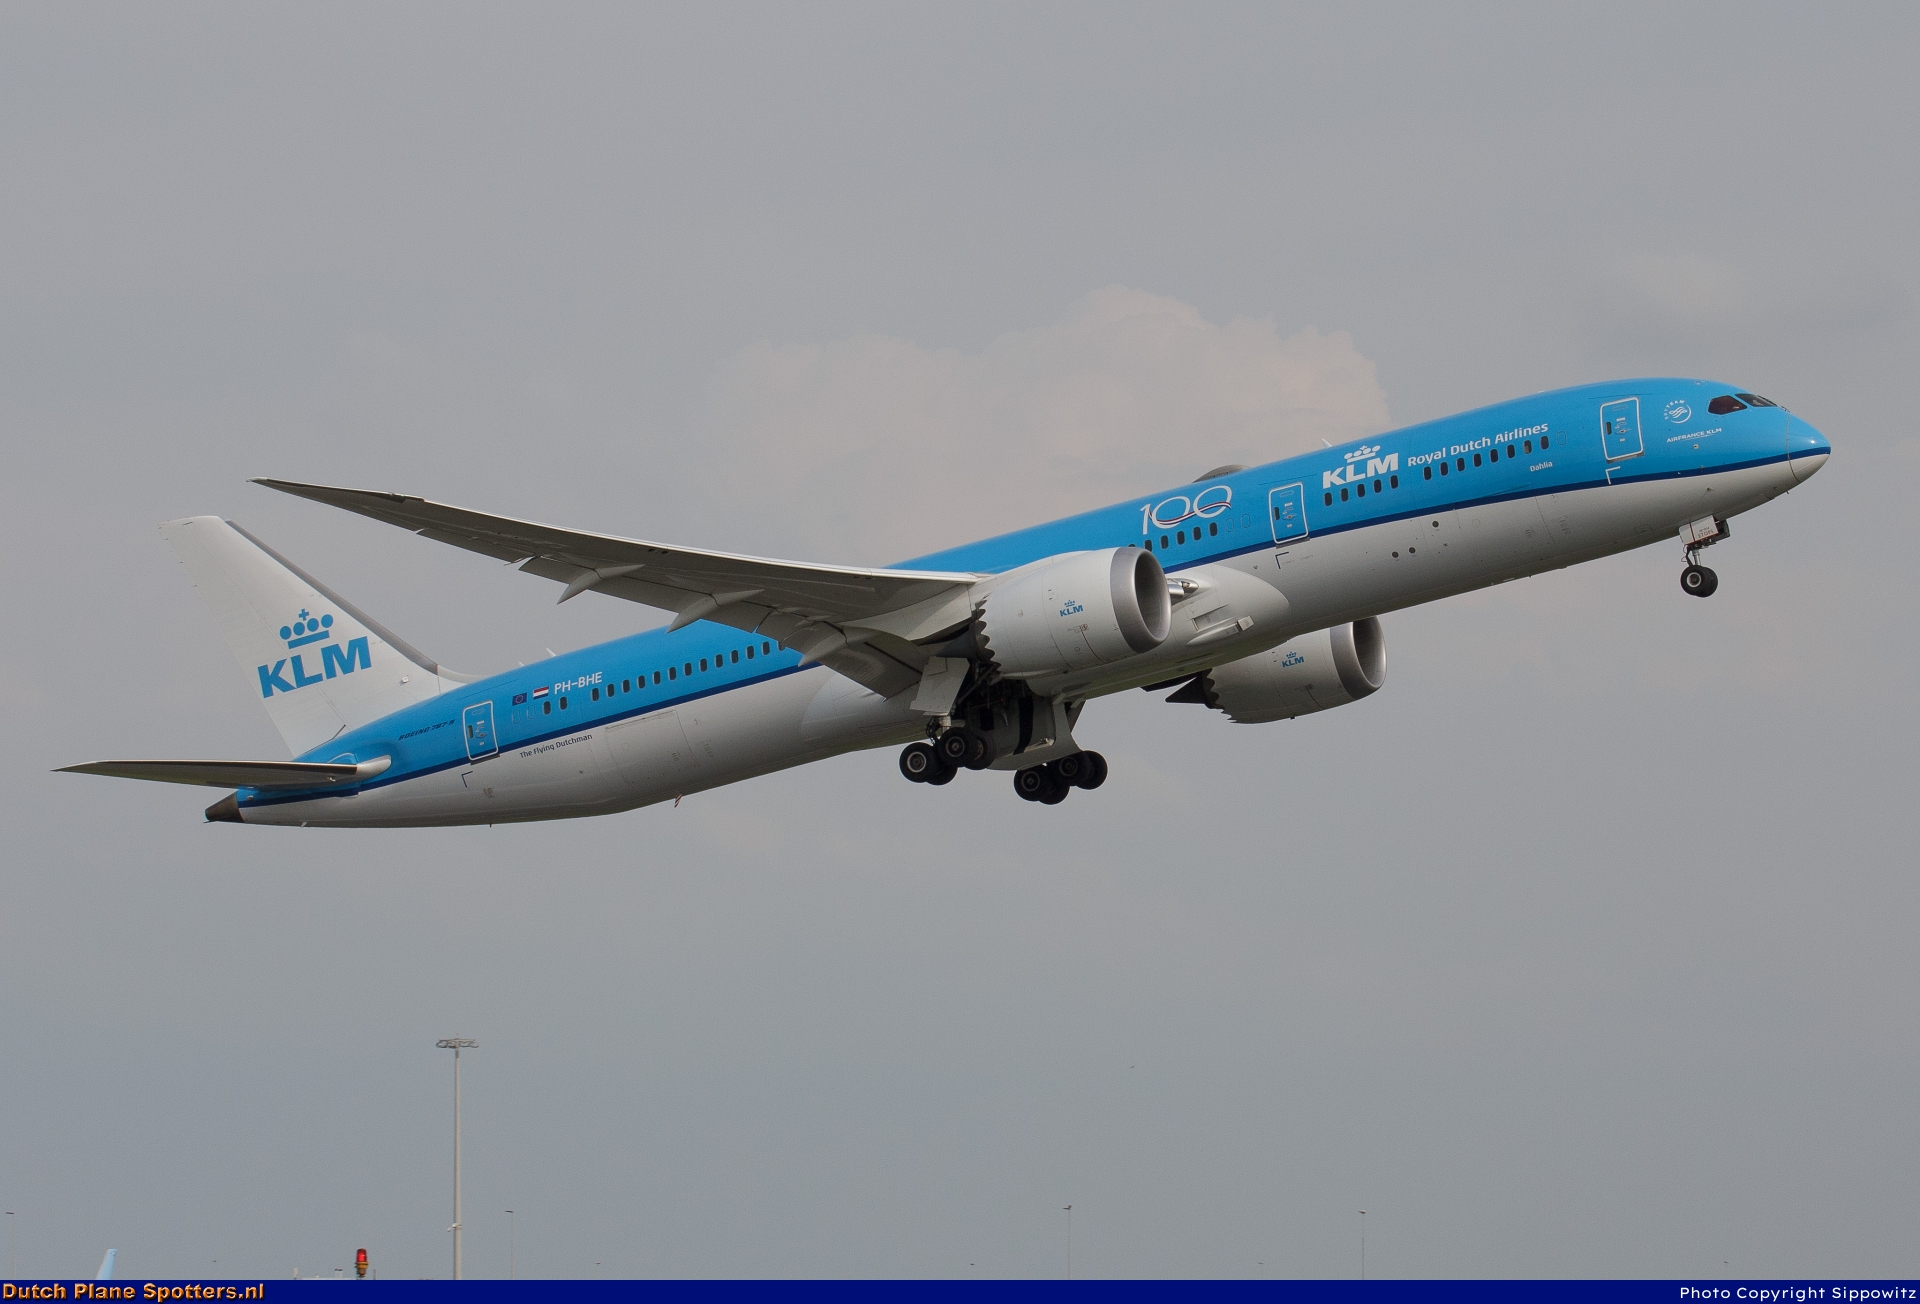 PH-BHE Boeing 787-9 Dreamliner KLM Royal Dutch Airlines by Sippowitz